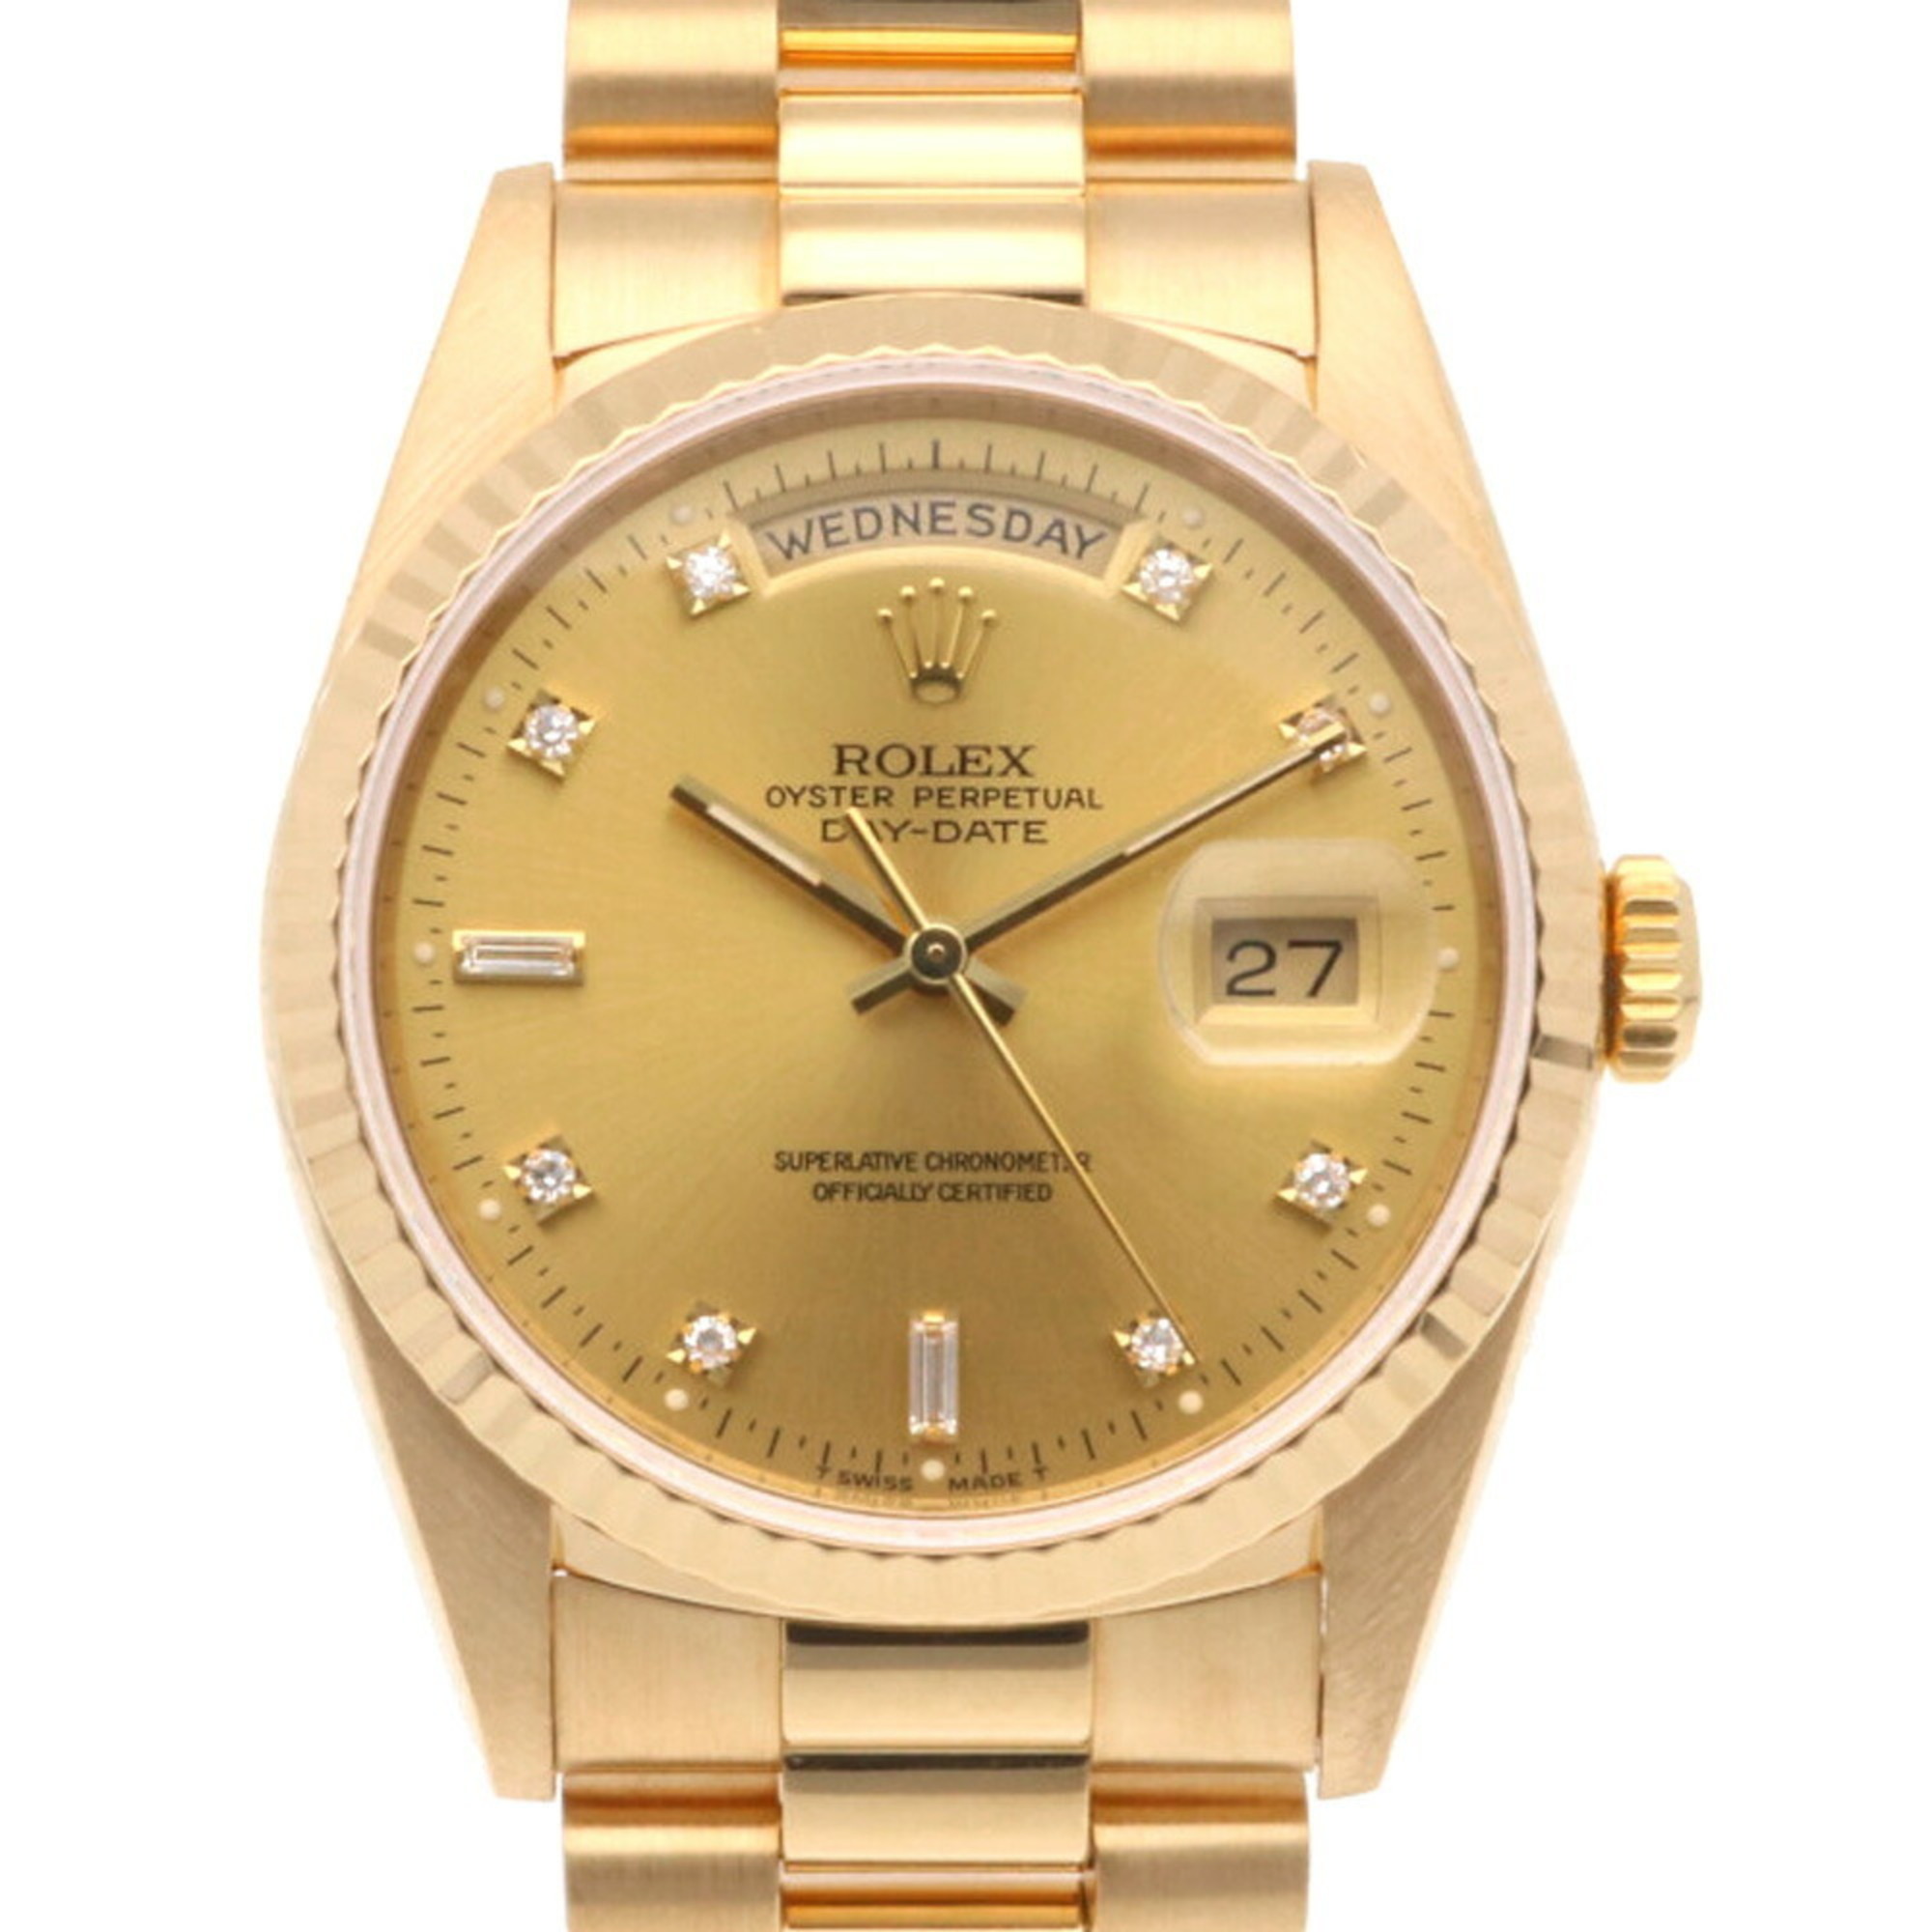 Rolex Day-Date Oyster Perpetual Watch 18K 18238 Automatic Men's L Series 1989-1990 Model Overhauled Index Diamond